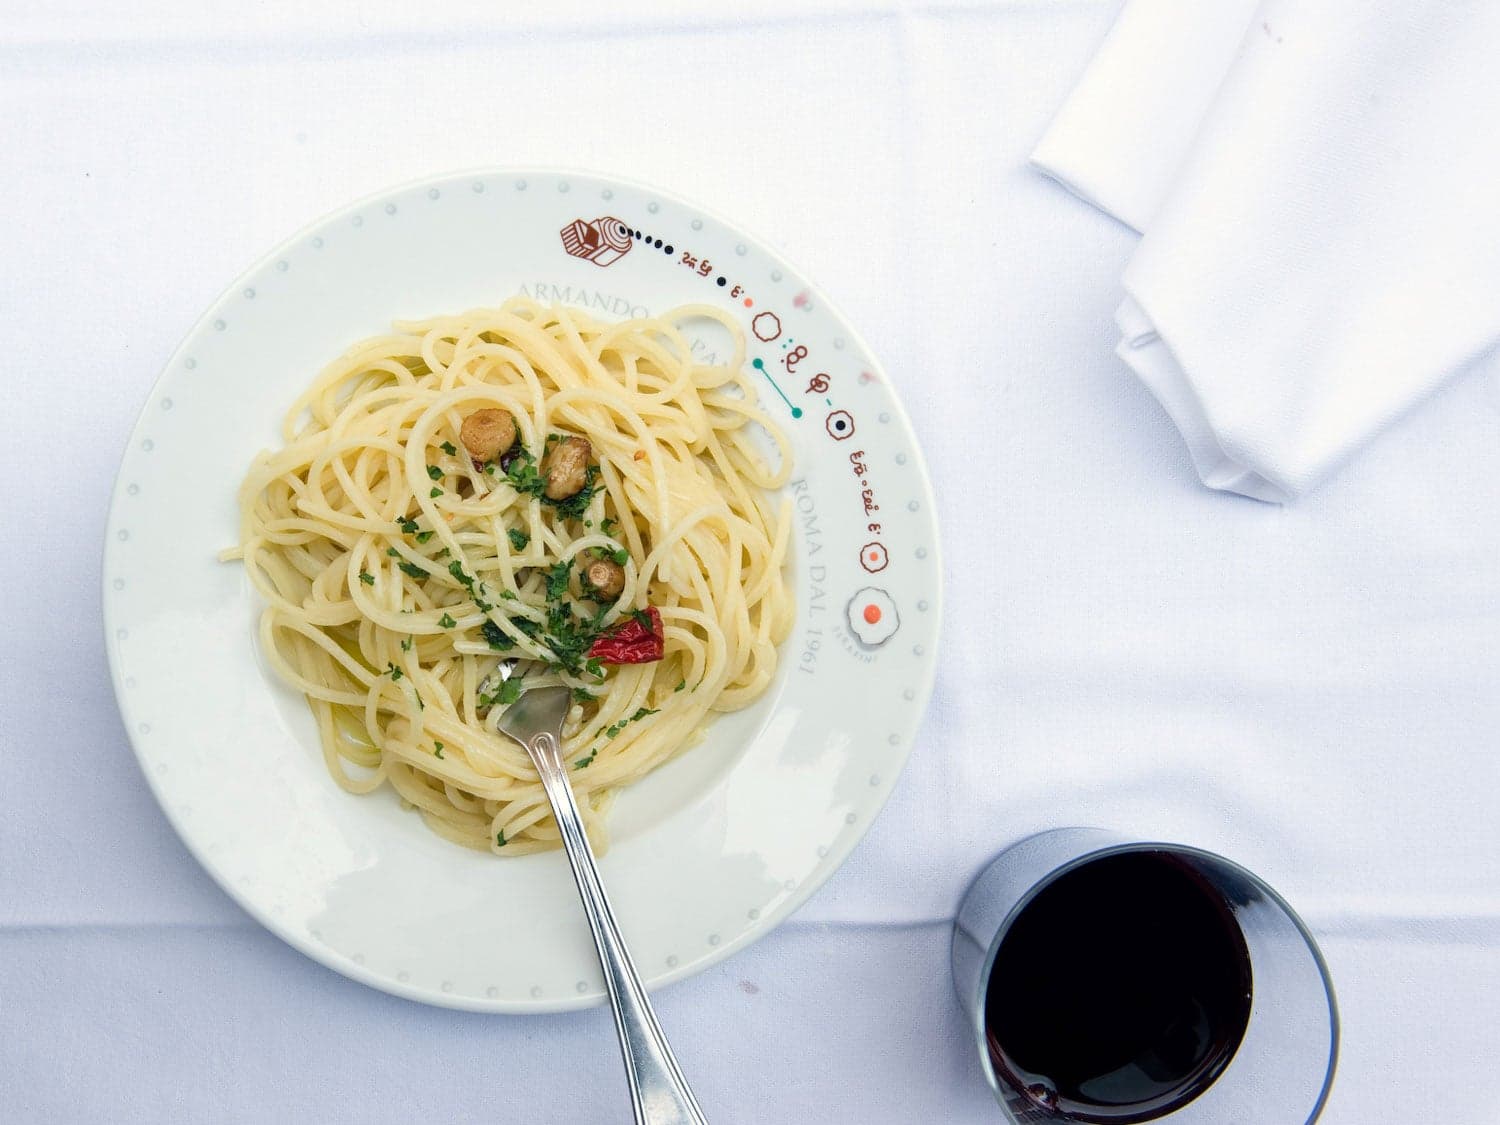 Spaghetti with Garlic, Olive Oil, and Peperoncino Chiles